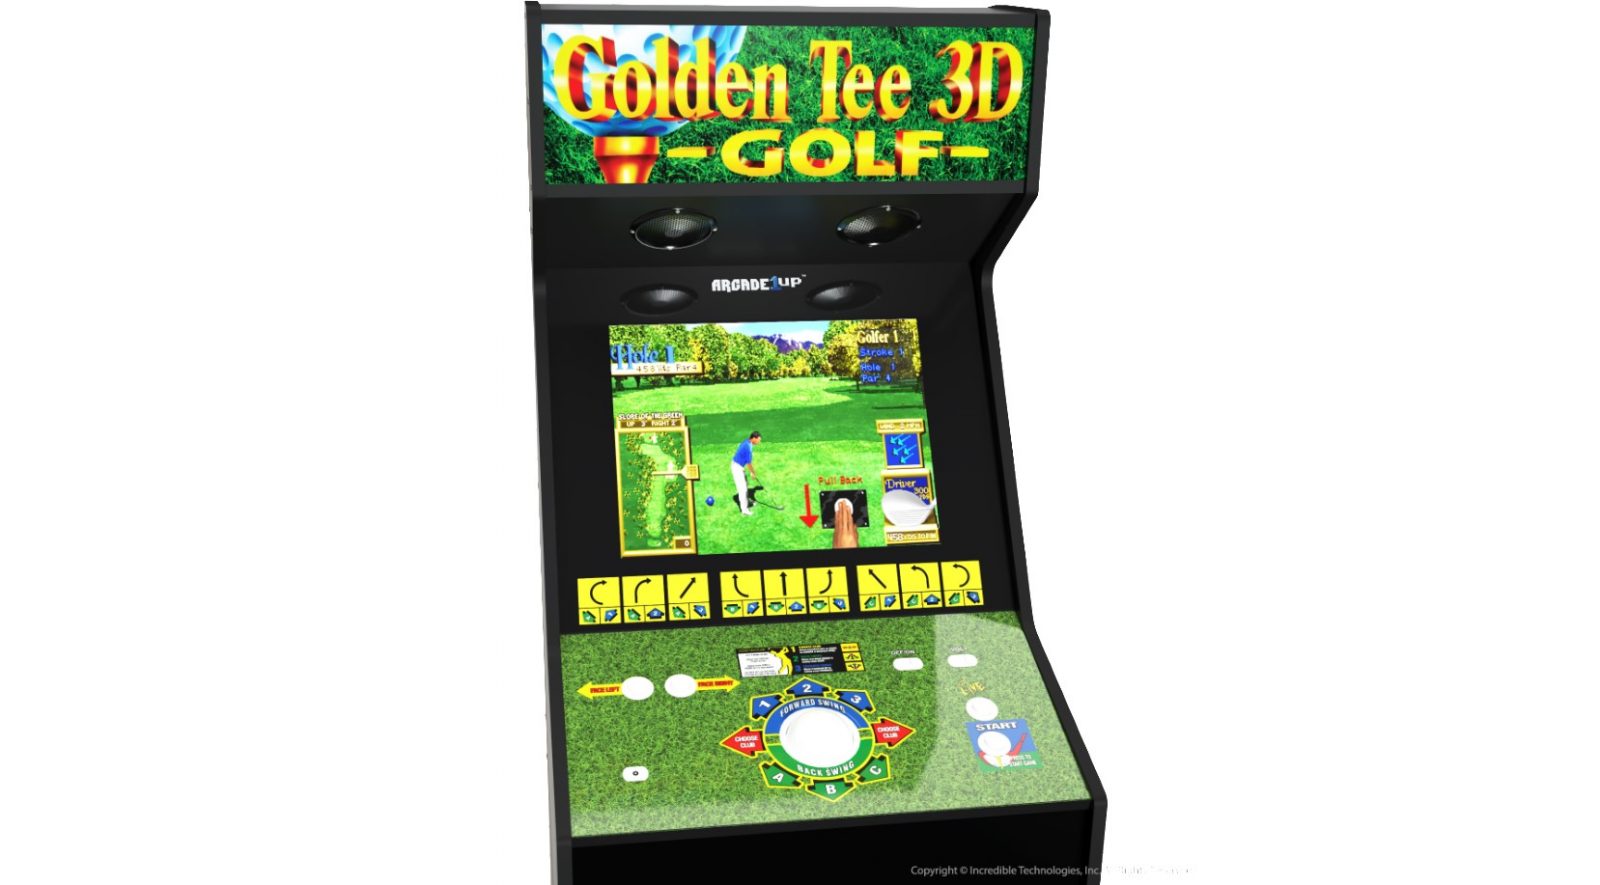 Buy Golden Tee PGA TOUR Home Edition Deluxe Online At $6599, 43% OFF